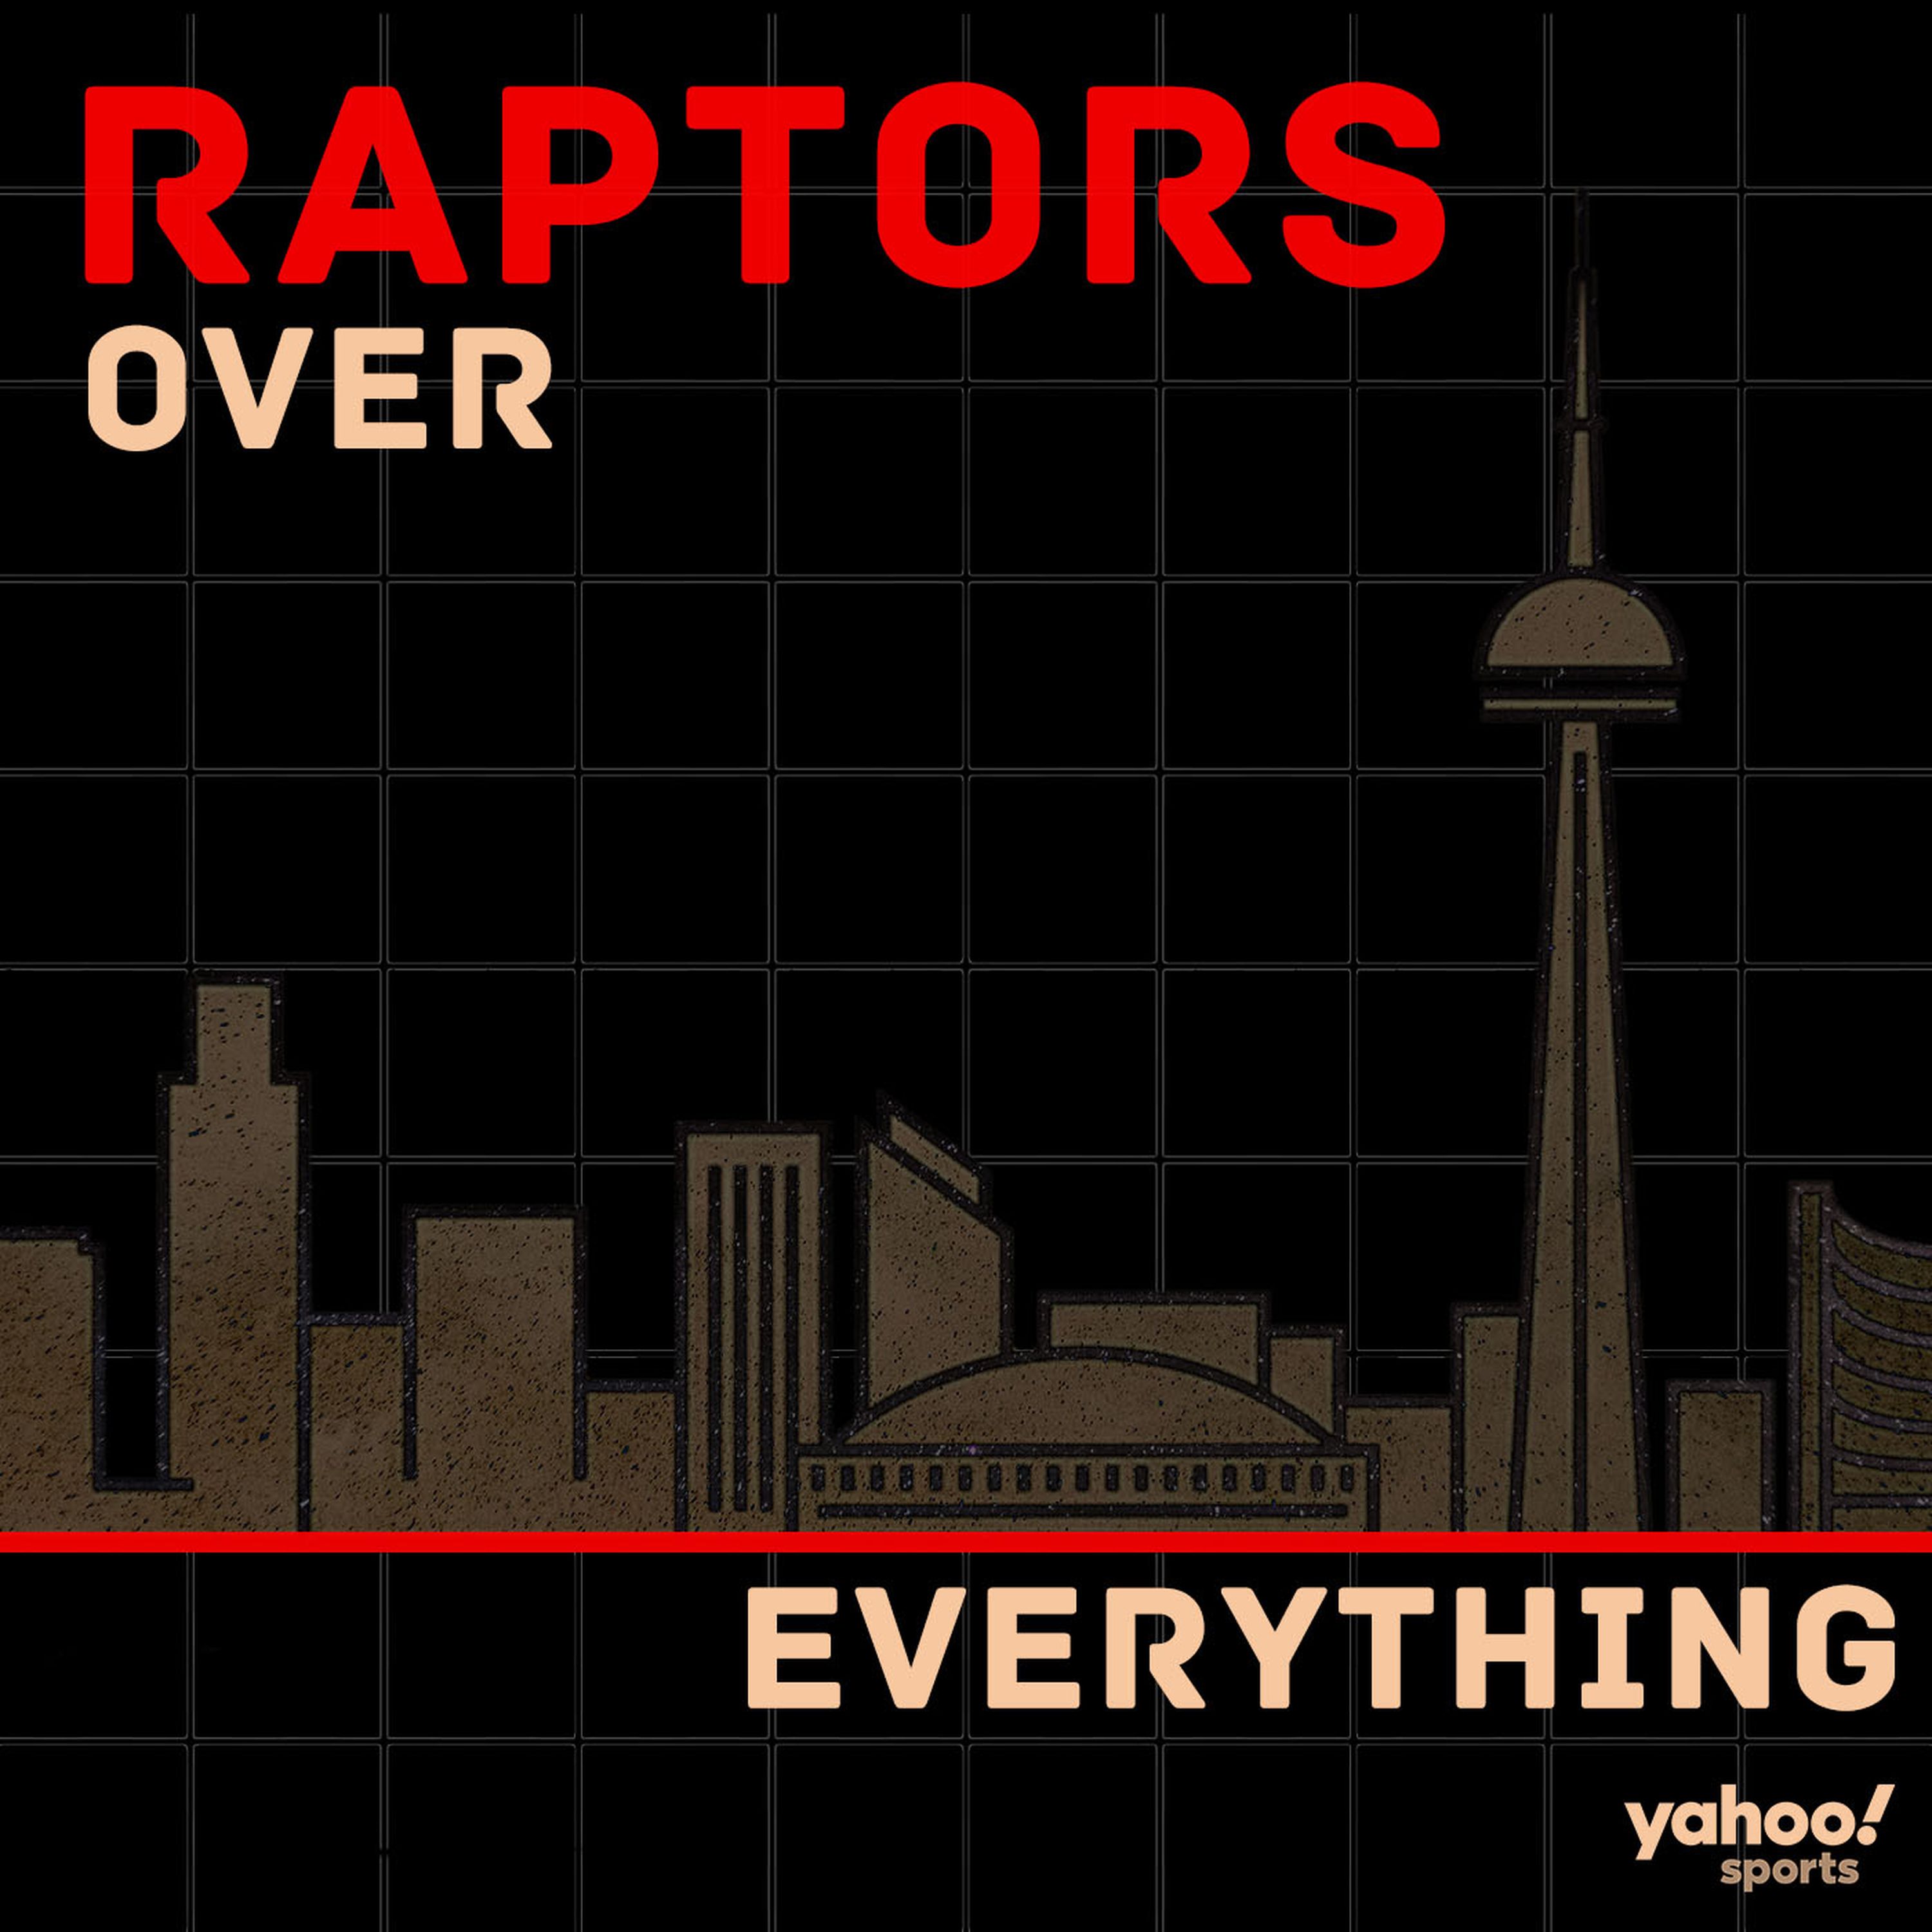 Blake Murphy on Raptors' injuries, and potential trade deadline moves